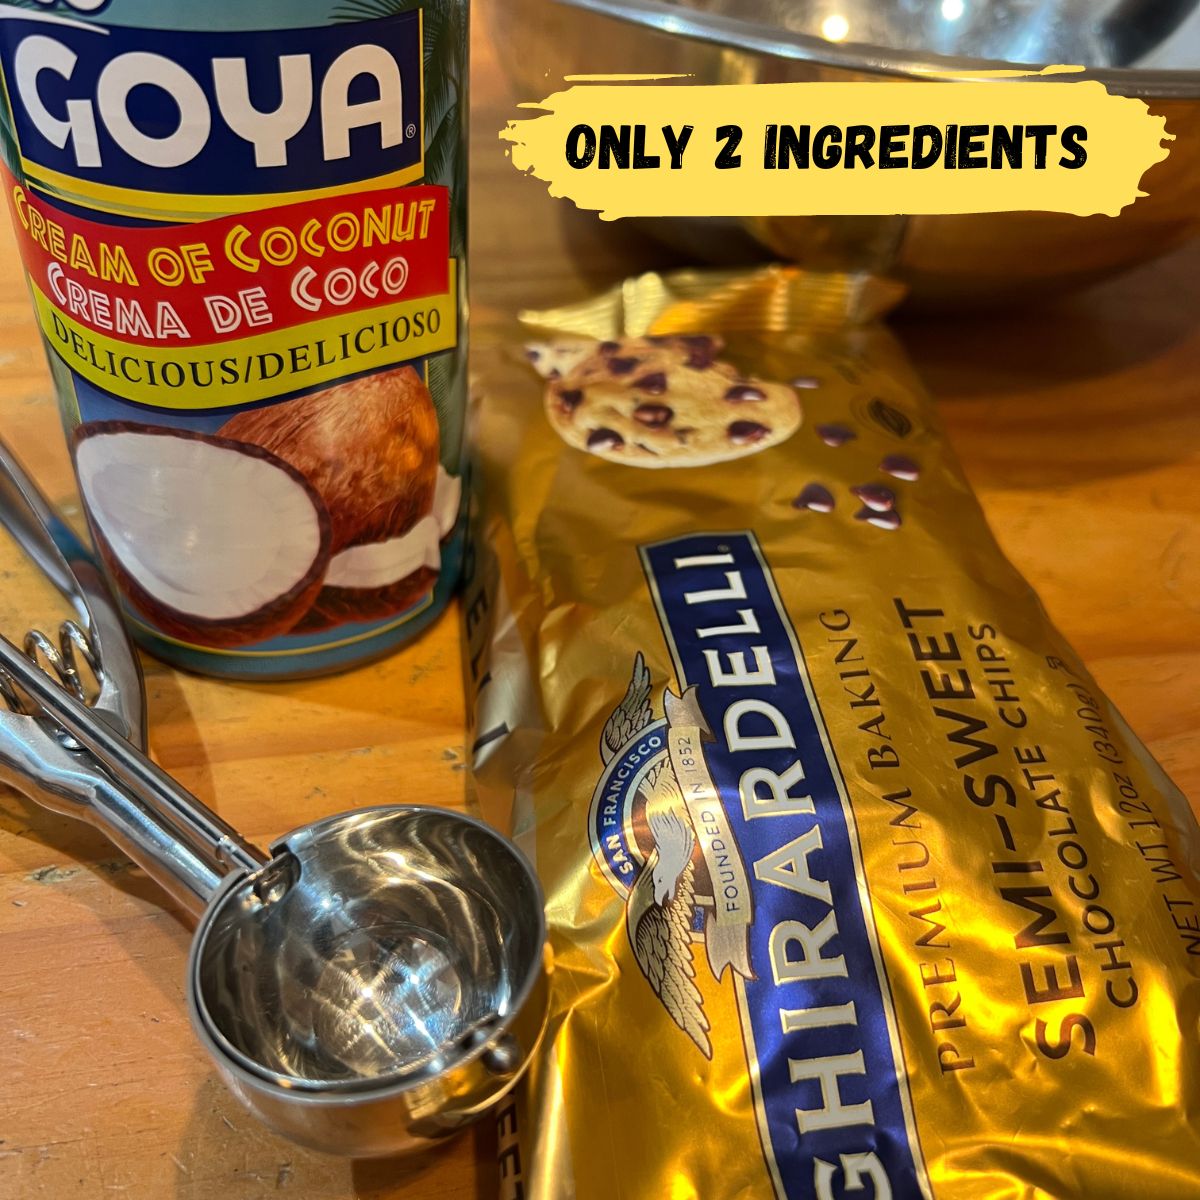 A can of GOYA cream of coconut and a mini stopper and a bag of Ghirardelli chocolate chips and a stainless steel bowl on a wooden table